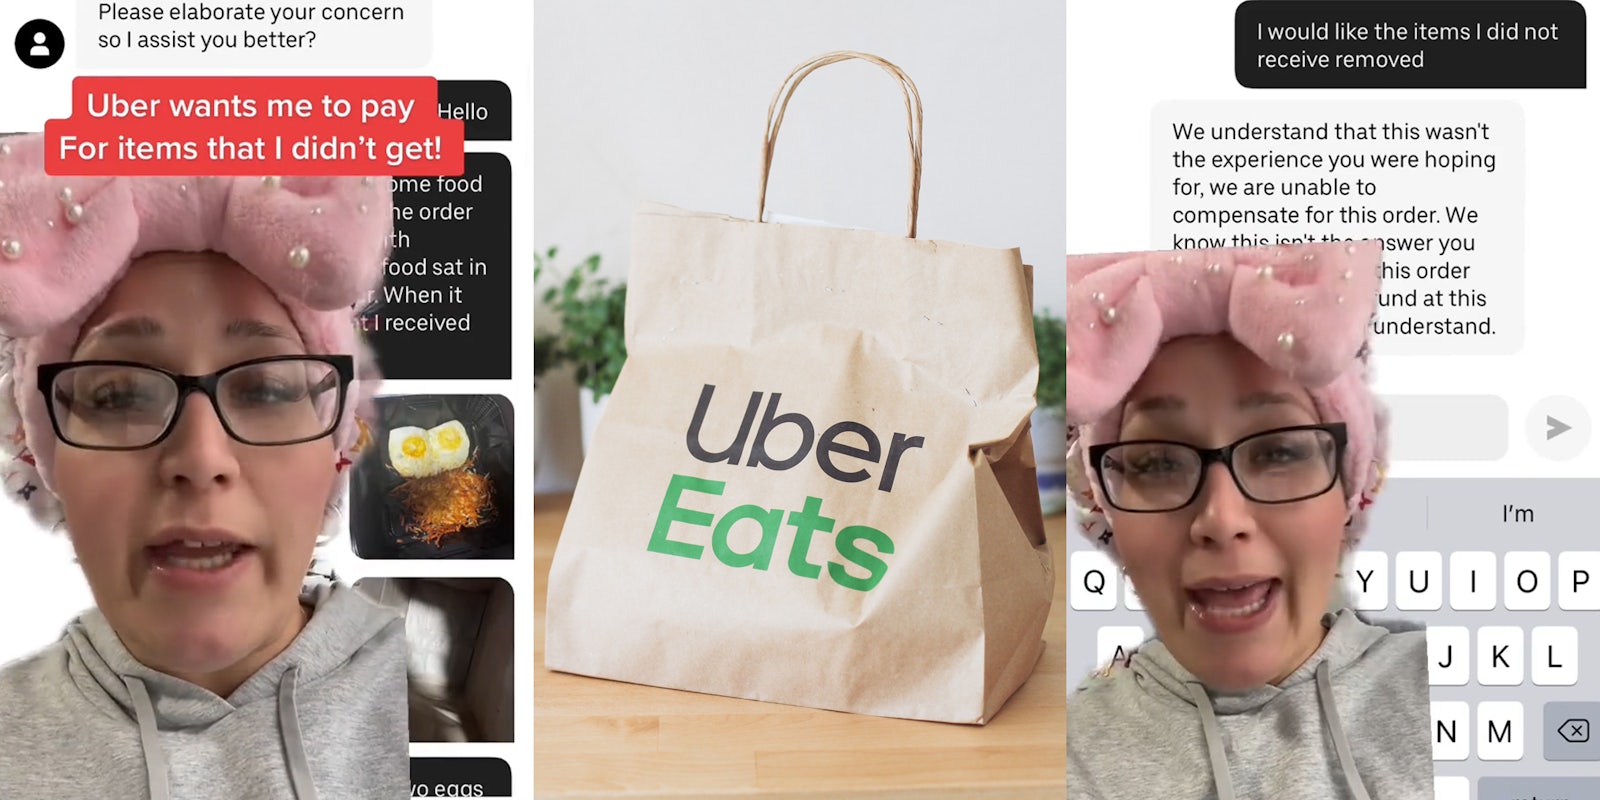 Uber Eats customer greenscreen TikTok over Uber Eats customer service chat with caption 'Uber wants me to pay for items I didn't get!' (l) Uber Eats paper bag on wooden floor in front of white wall (c) Uber Eats customer greenscreen TikTok over Uber Eats customer service chat (r)